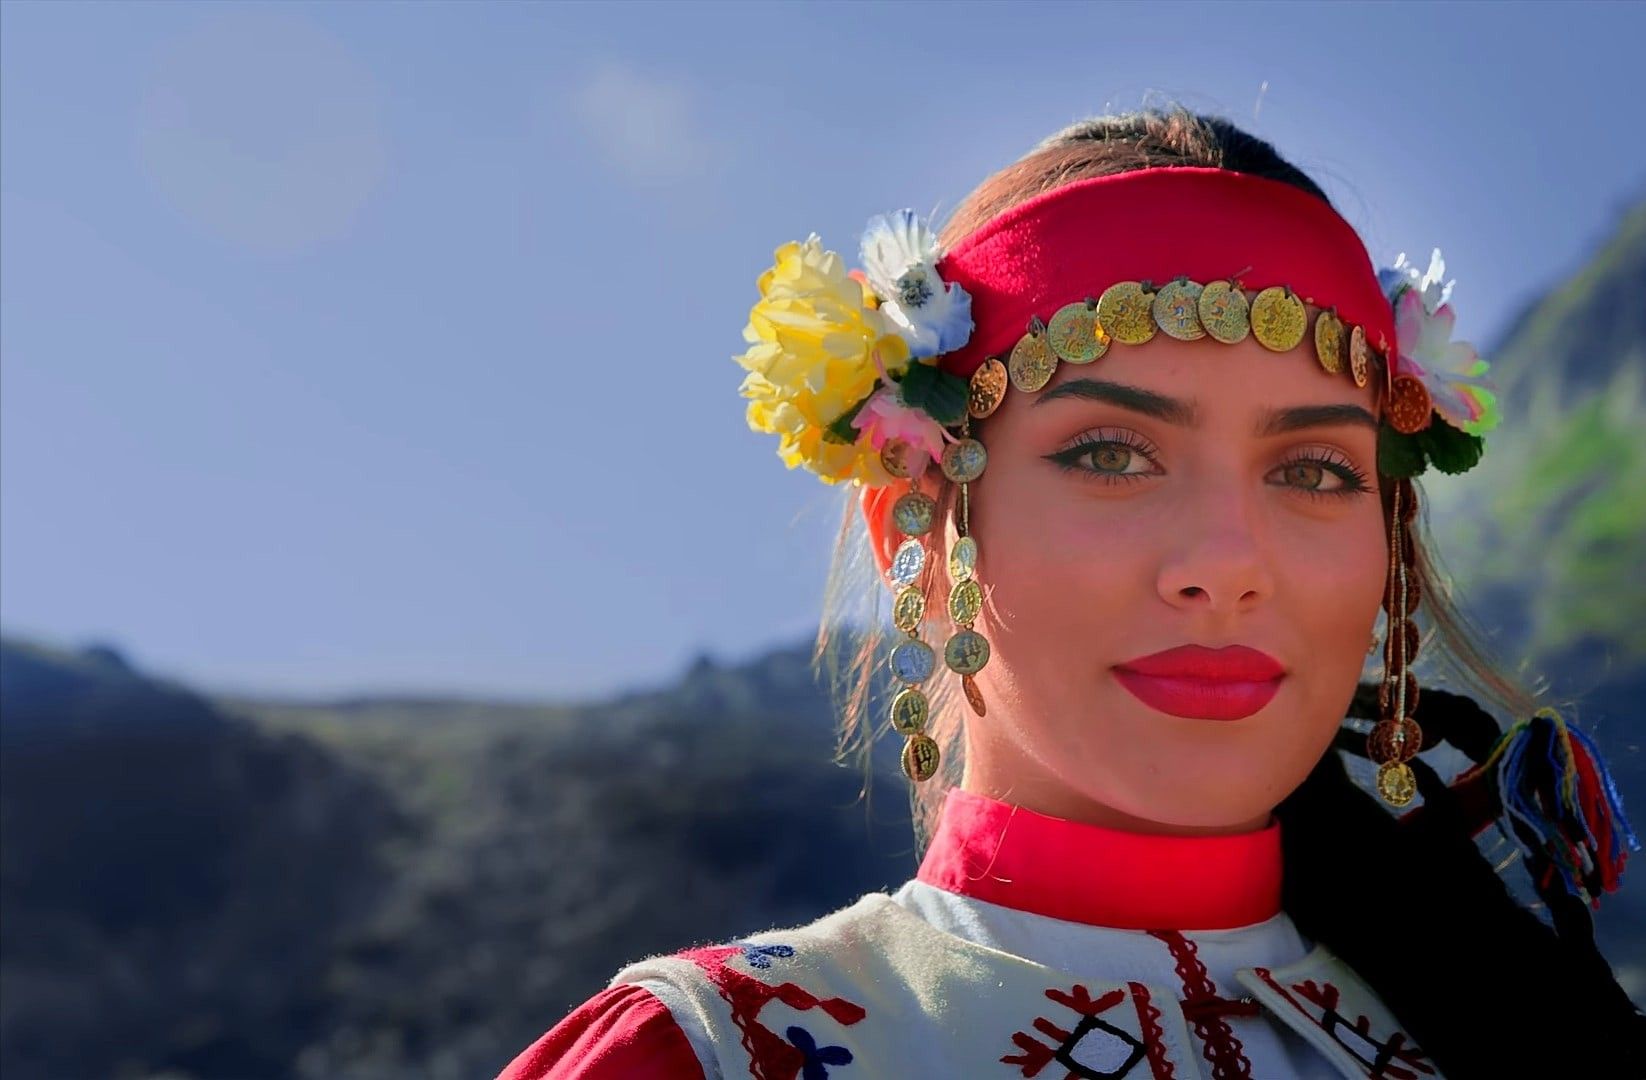 Bulgarian brides: who are they and why are they so attractive?